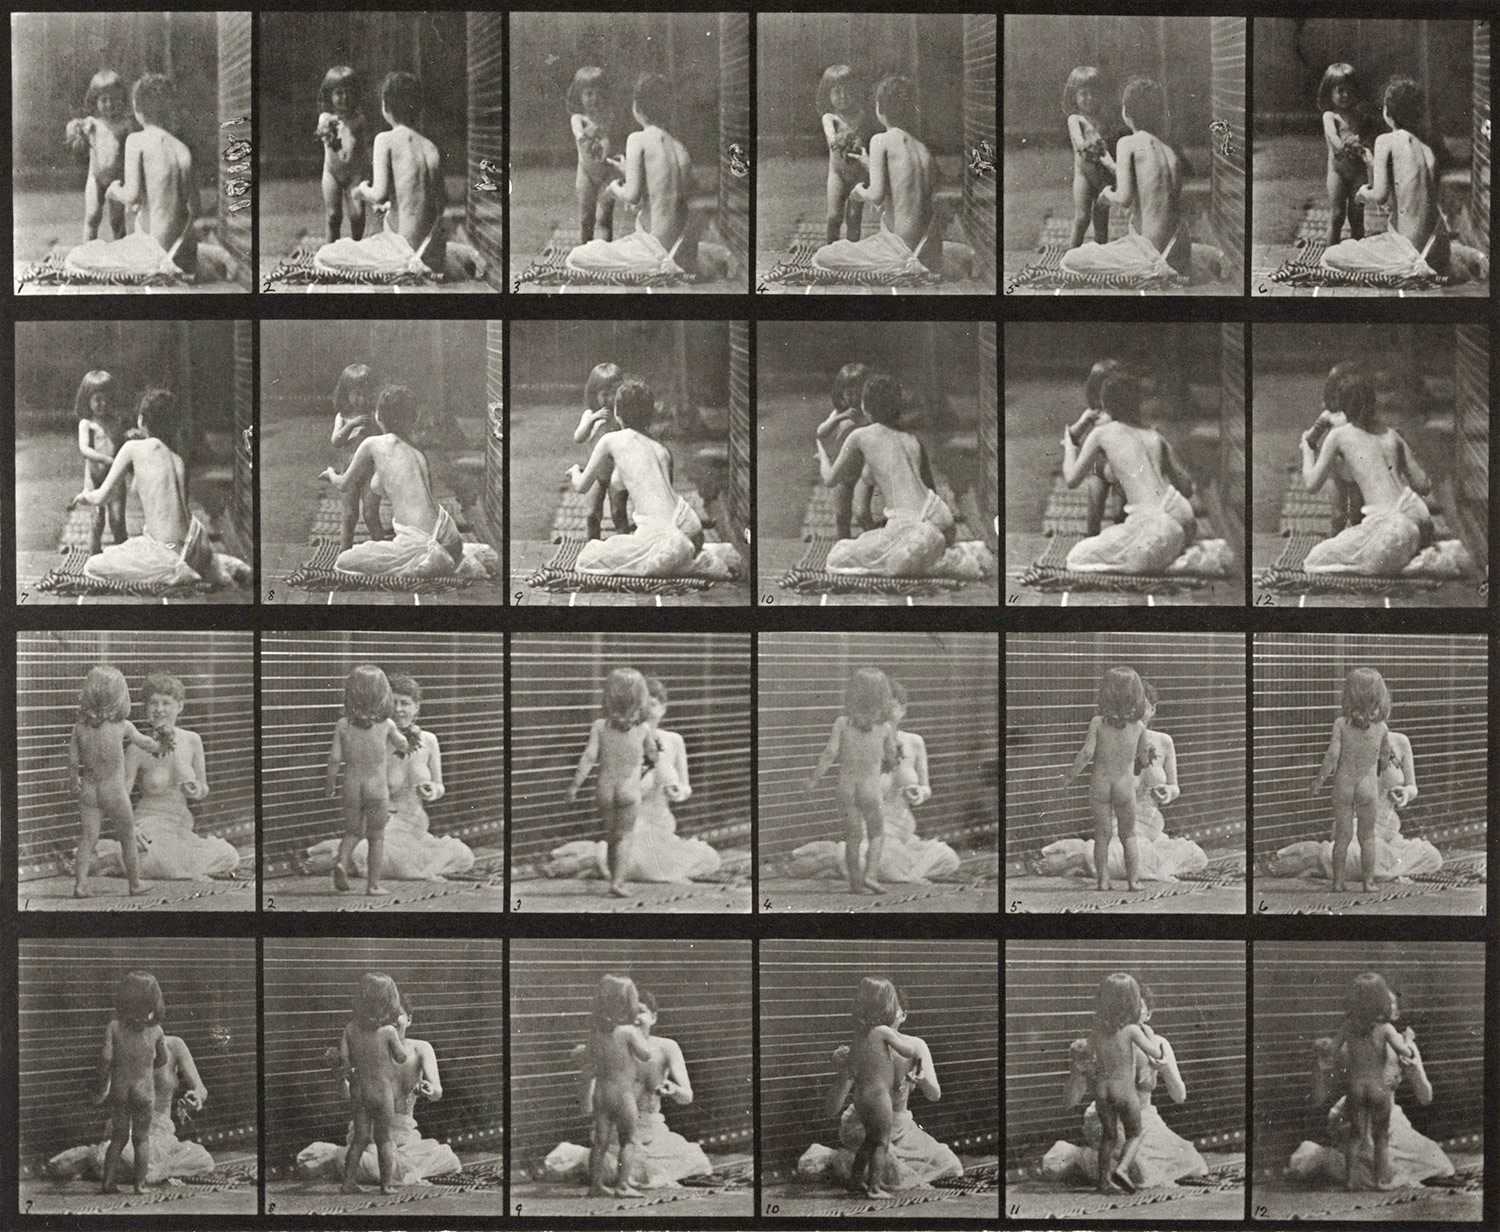 Sequence of black and white photos showing the movements of a young child giving a bouquet to a kneeling woman